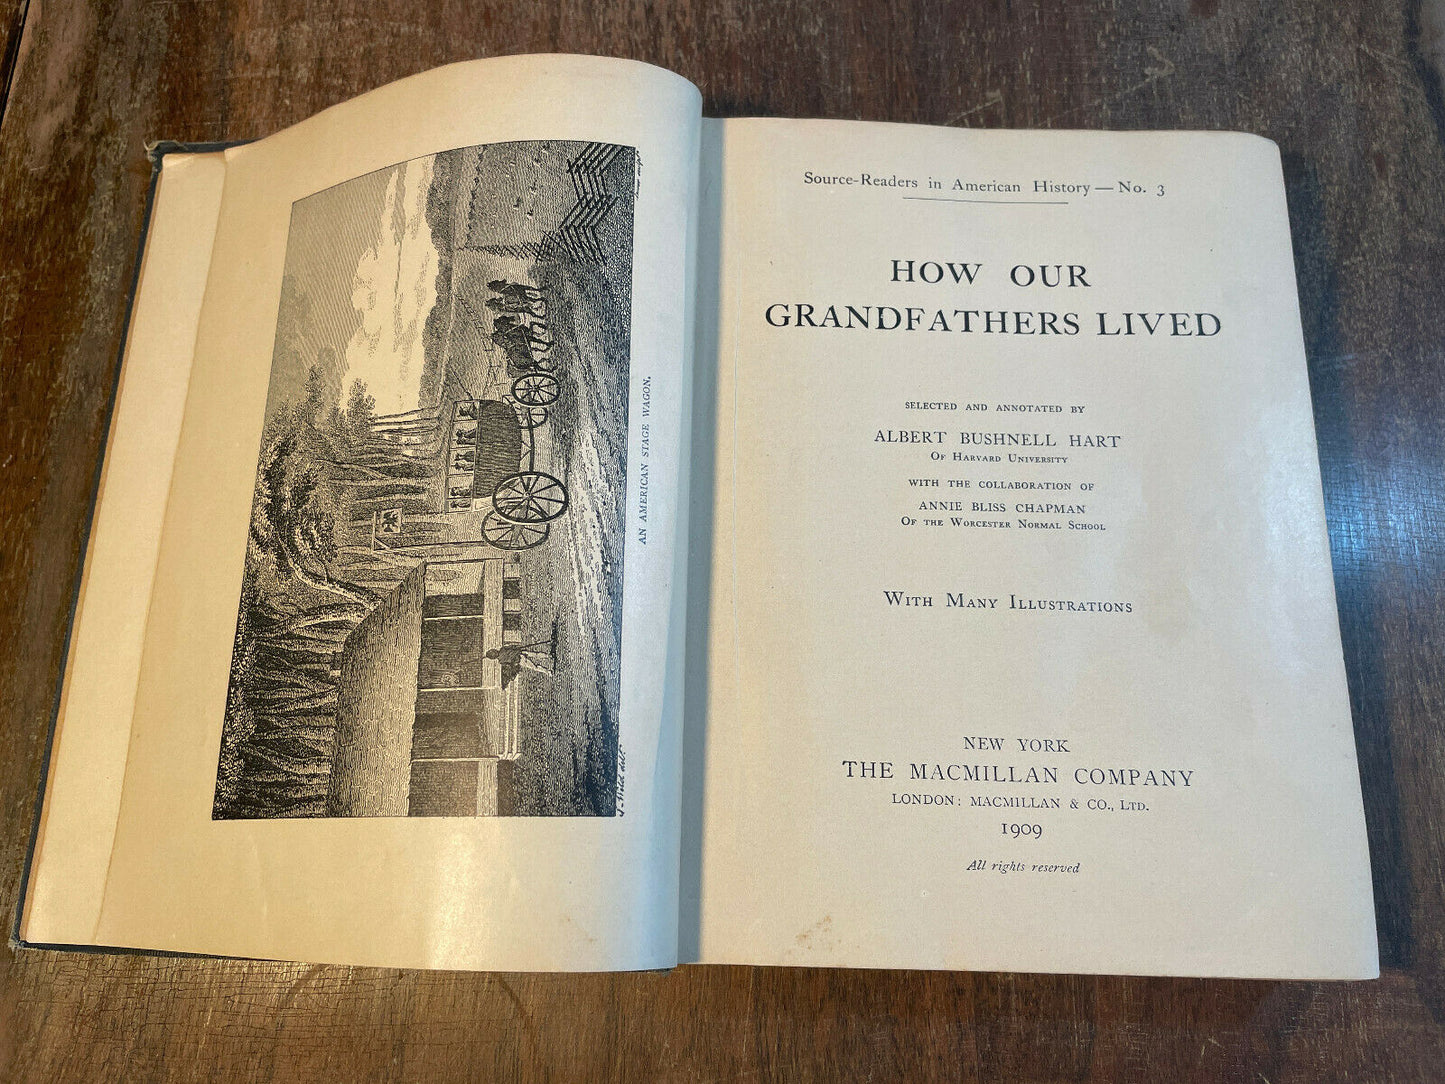 How Our Grandfathers Lived--Source Readers in American History No 3--1915 (J6)